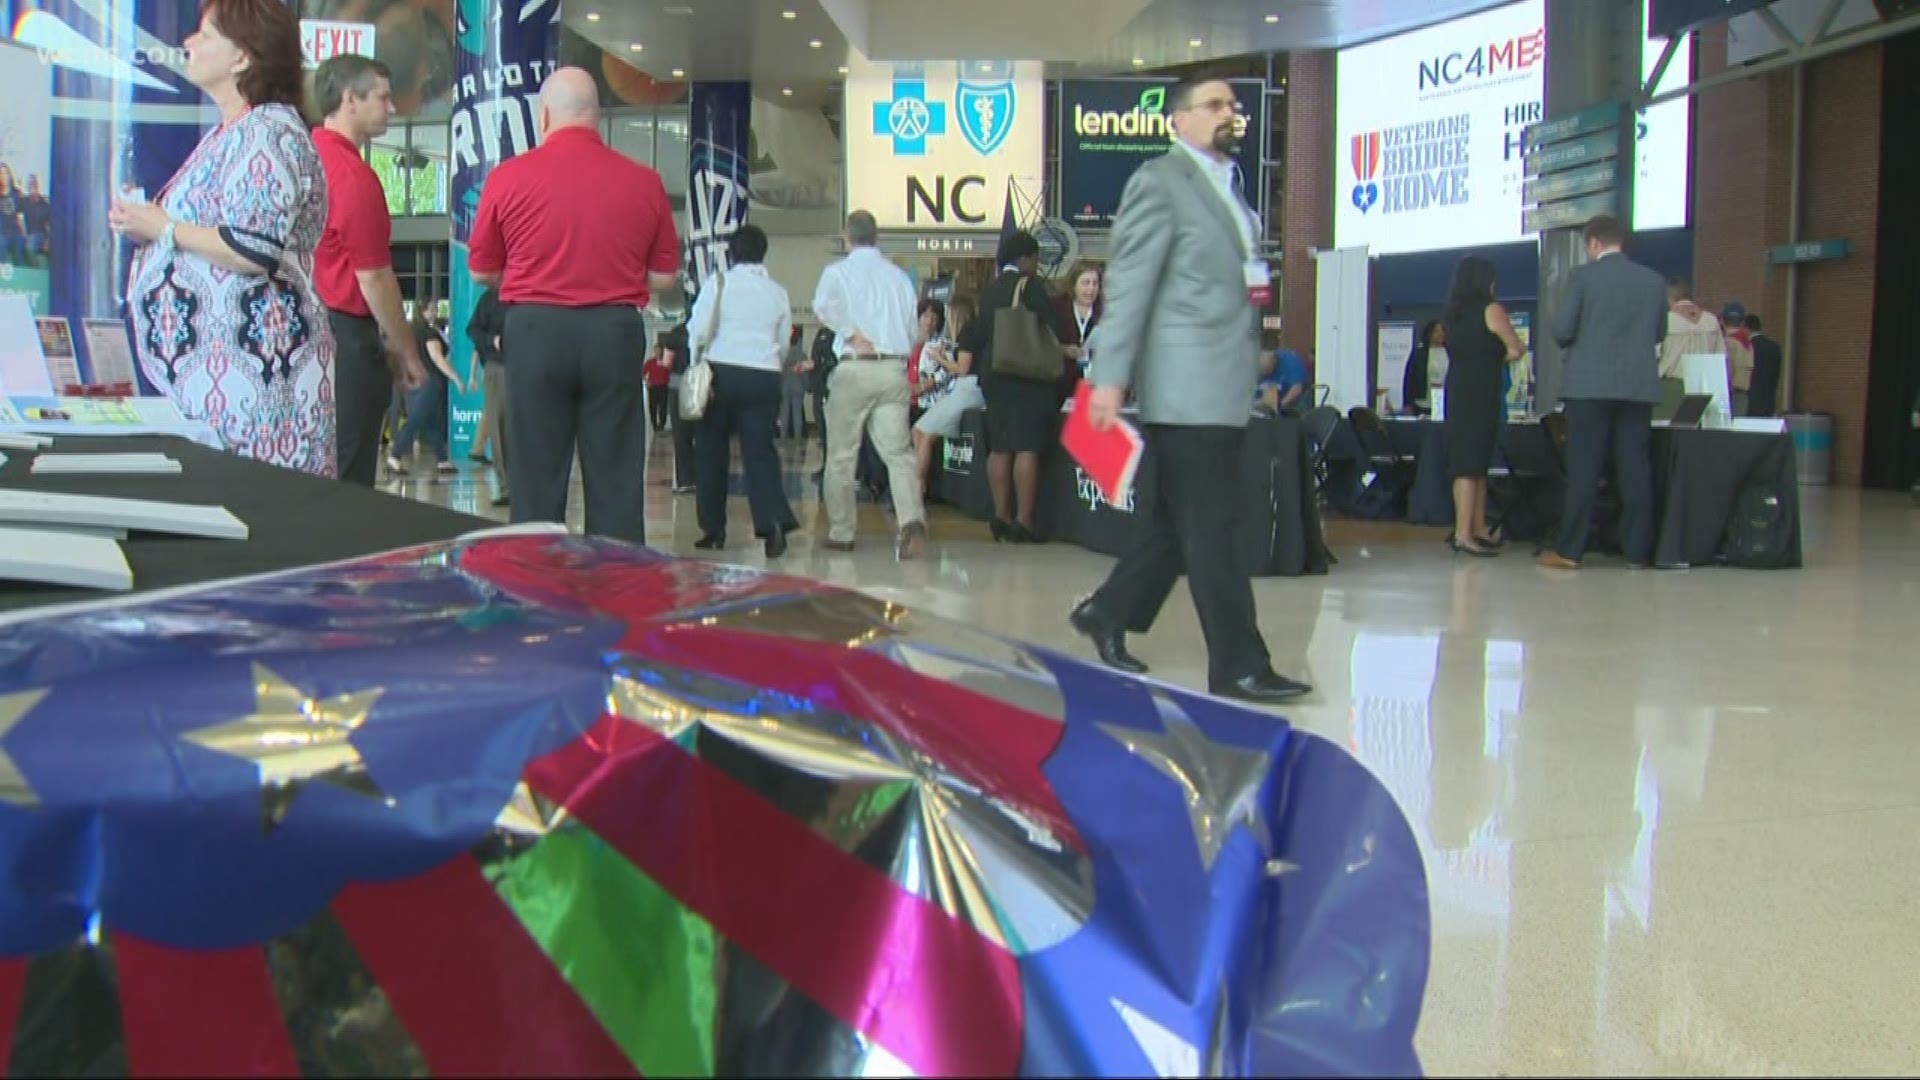 More than 200 veterans met with 73 different corporations Wednesday, and 18 veteran service groups took part.